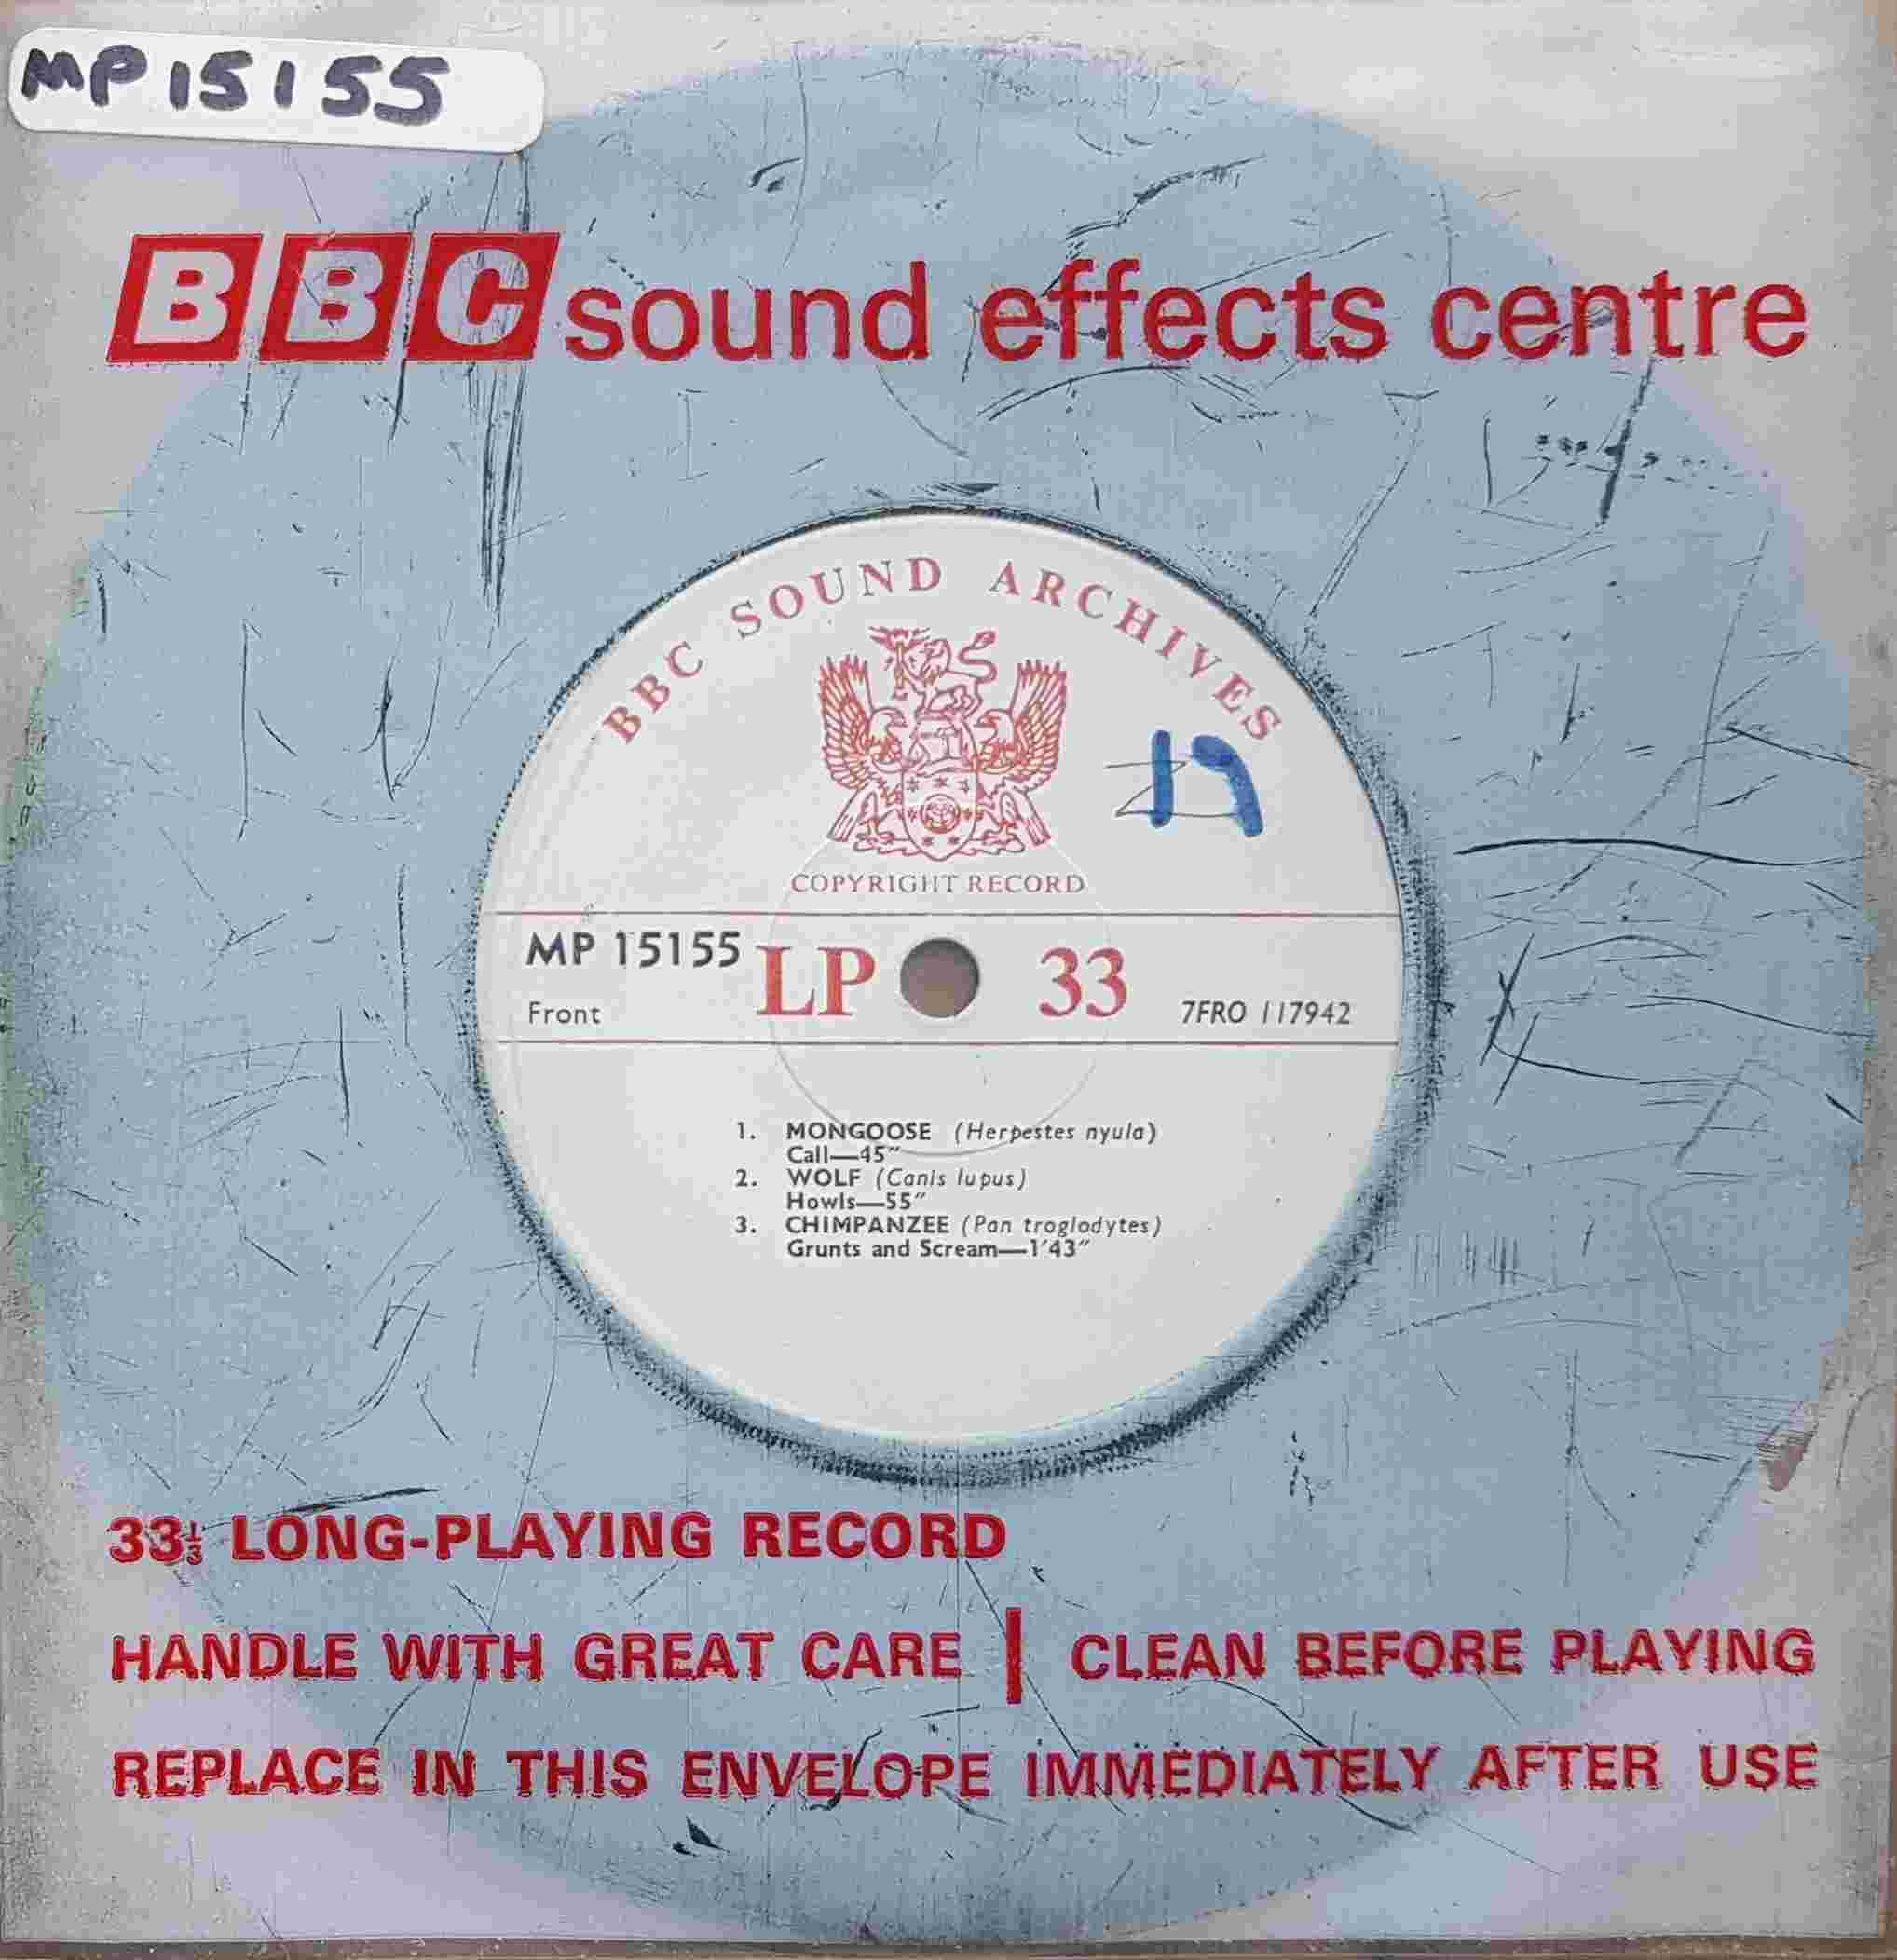 Picture of MP 15155 Animals by artist Not registered from the BBC singles - Records and Tapes library